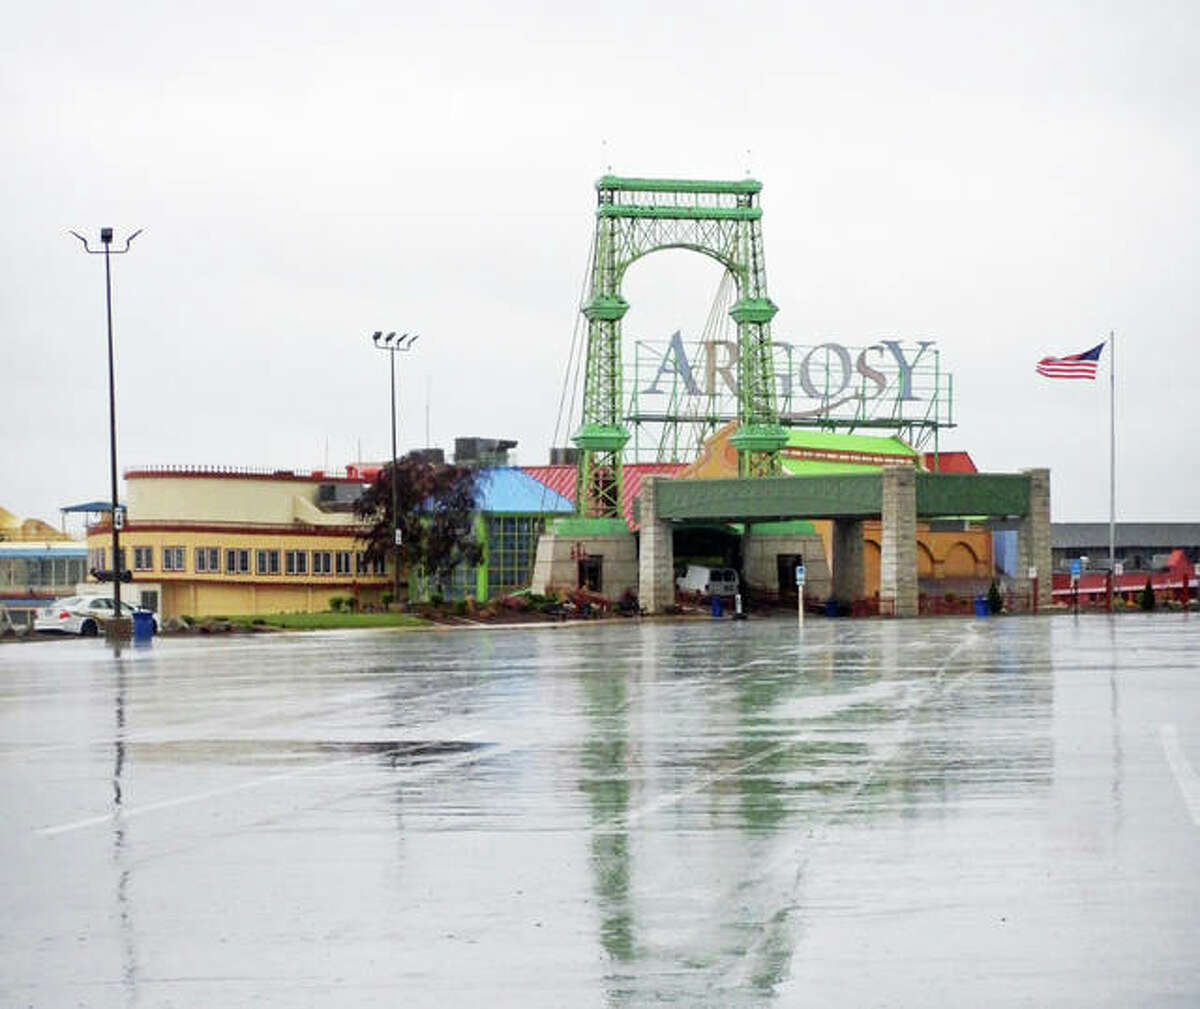 Argosy casino in Alton is open again after the pandemic forced it to close. The casino is open 9 a.m. to 2 a.m. every day and until 3 a.m. on Friday and Saturdays. Argosy offers a sportsbook, plenty of slots and games like blackjack, craps and roulette. For more information, visit their website. 